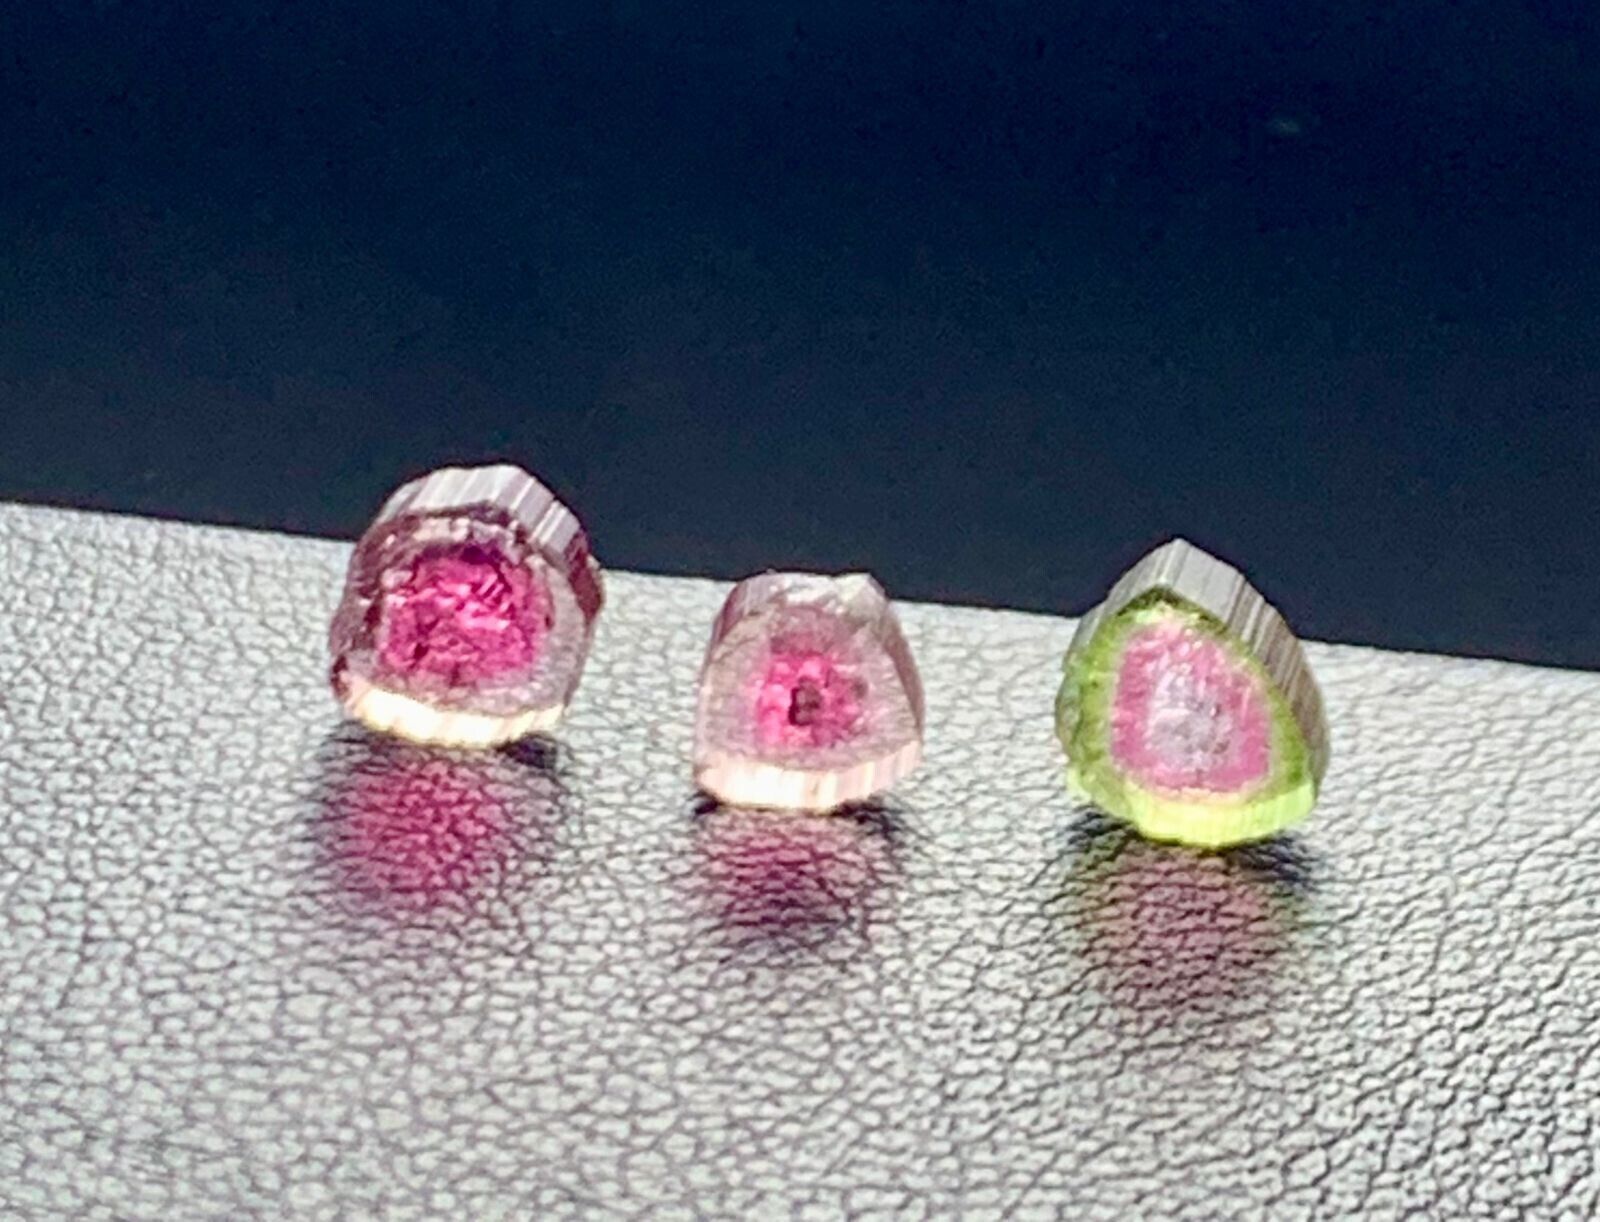 3 x 2.20 Cts beautiful watermelon tourmaline slices from Afghanistan